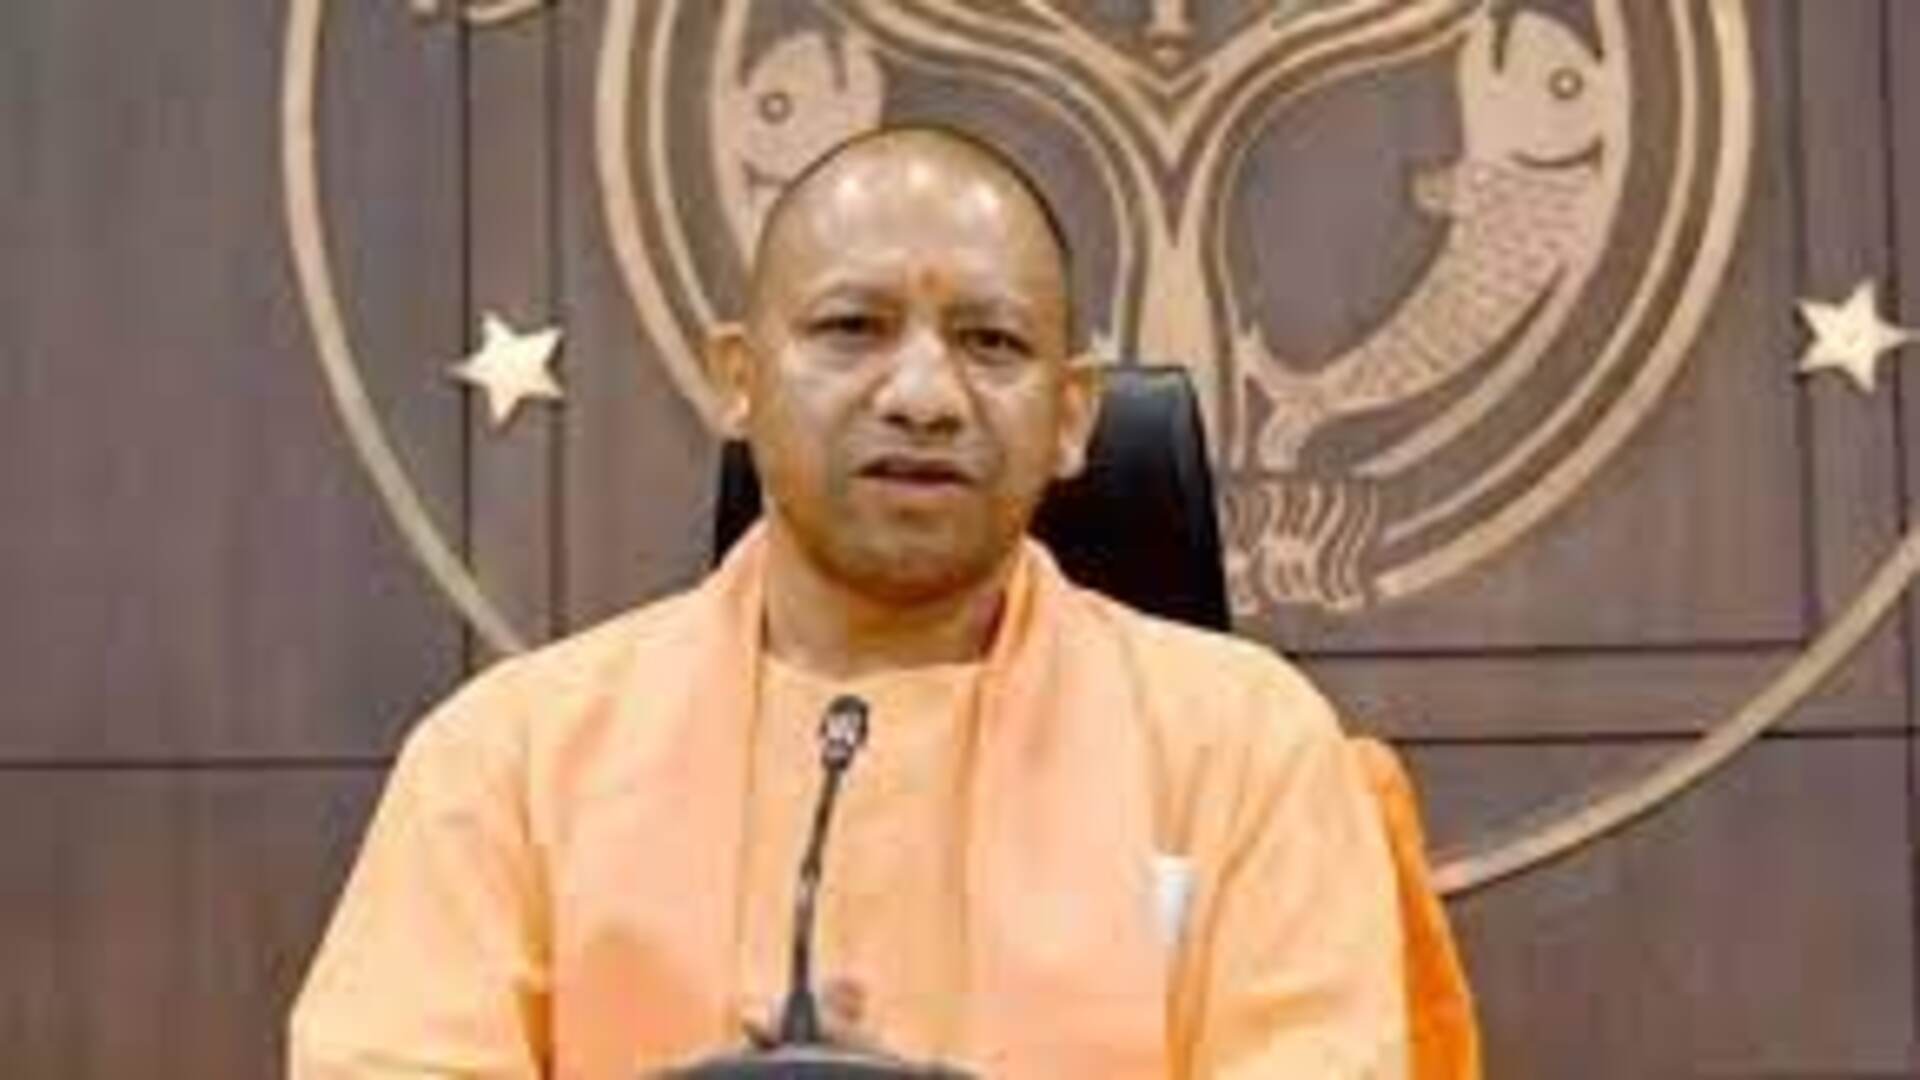 Ram Lalla Darshan By CM Yogi and MLAs To Be Held Around Noon Today